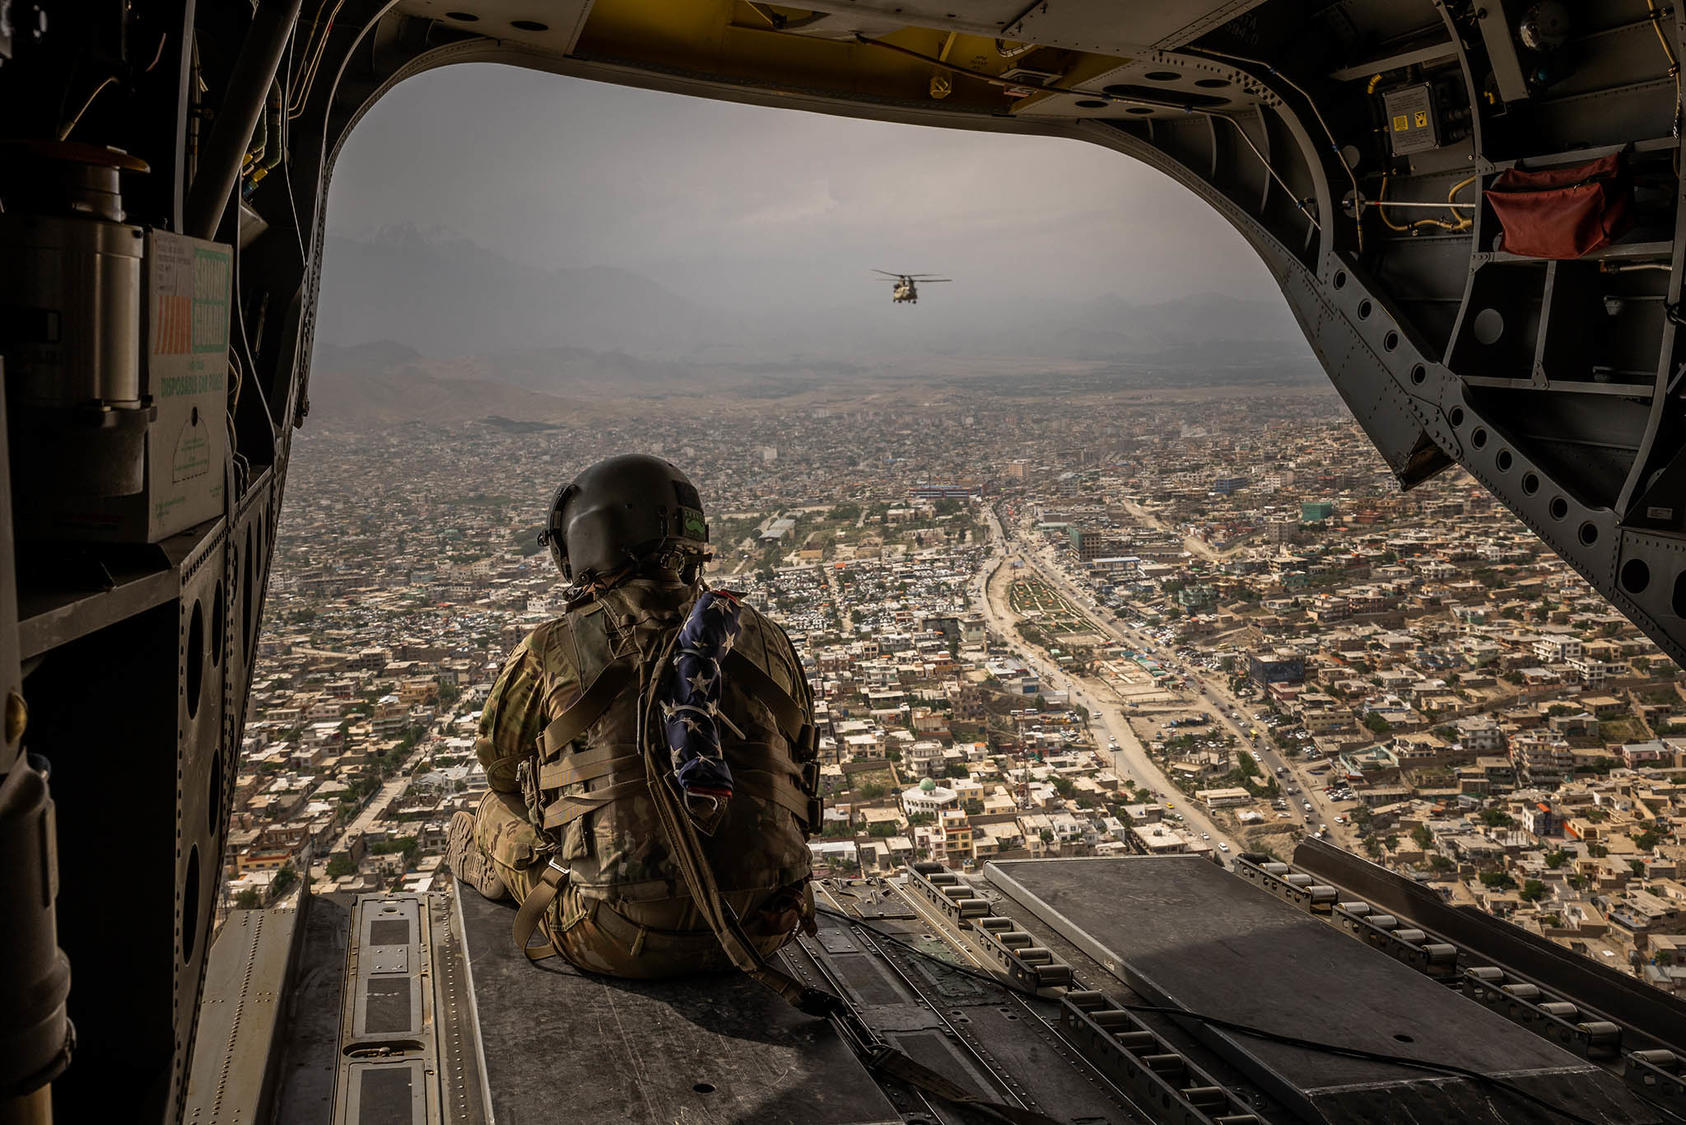 A U.S. Army Chinook helicopter flies over Kabul, Afghanistan, May 2, 2021. (Jim Huylebroek/The New York Times)